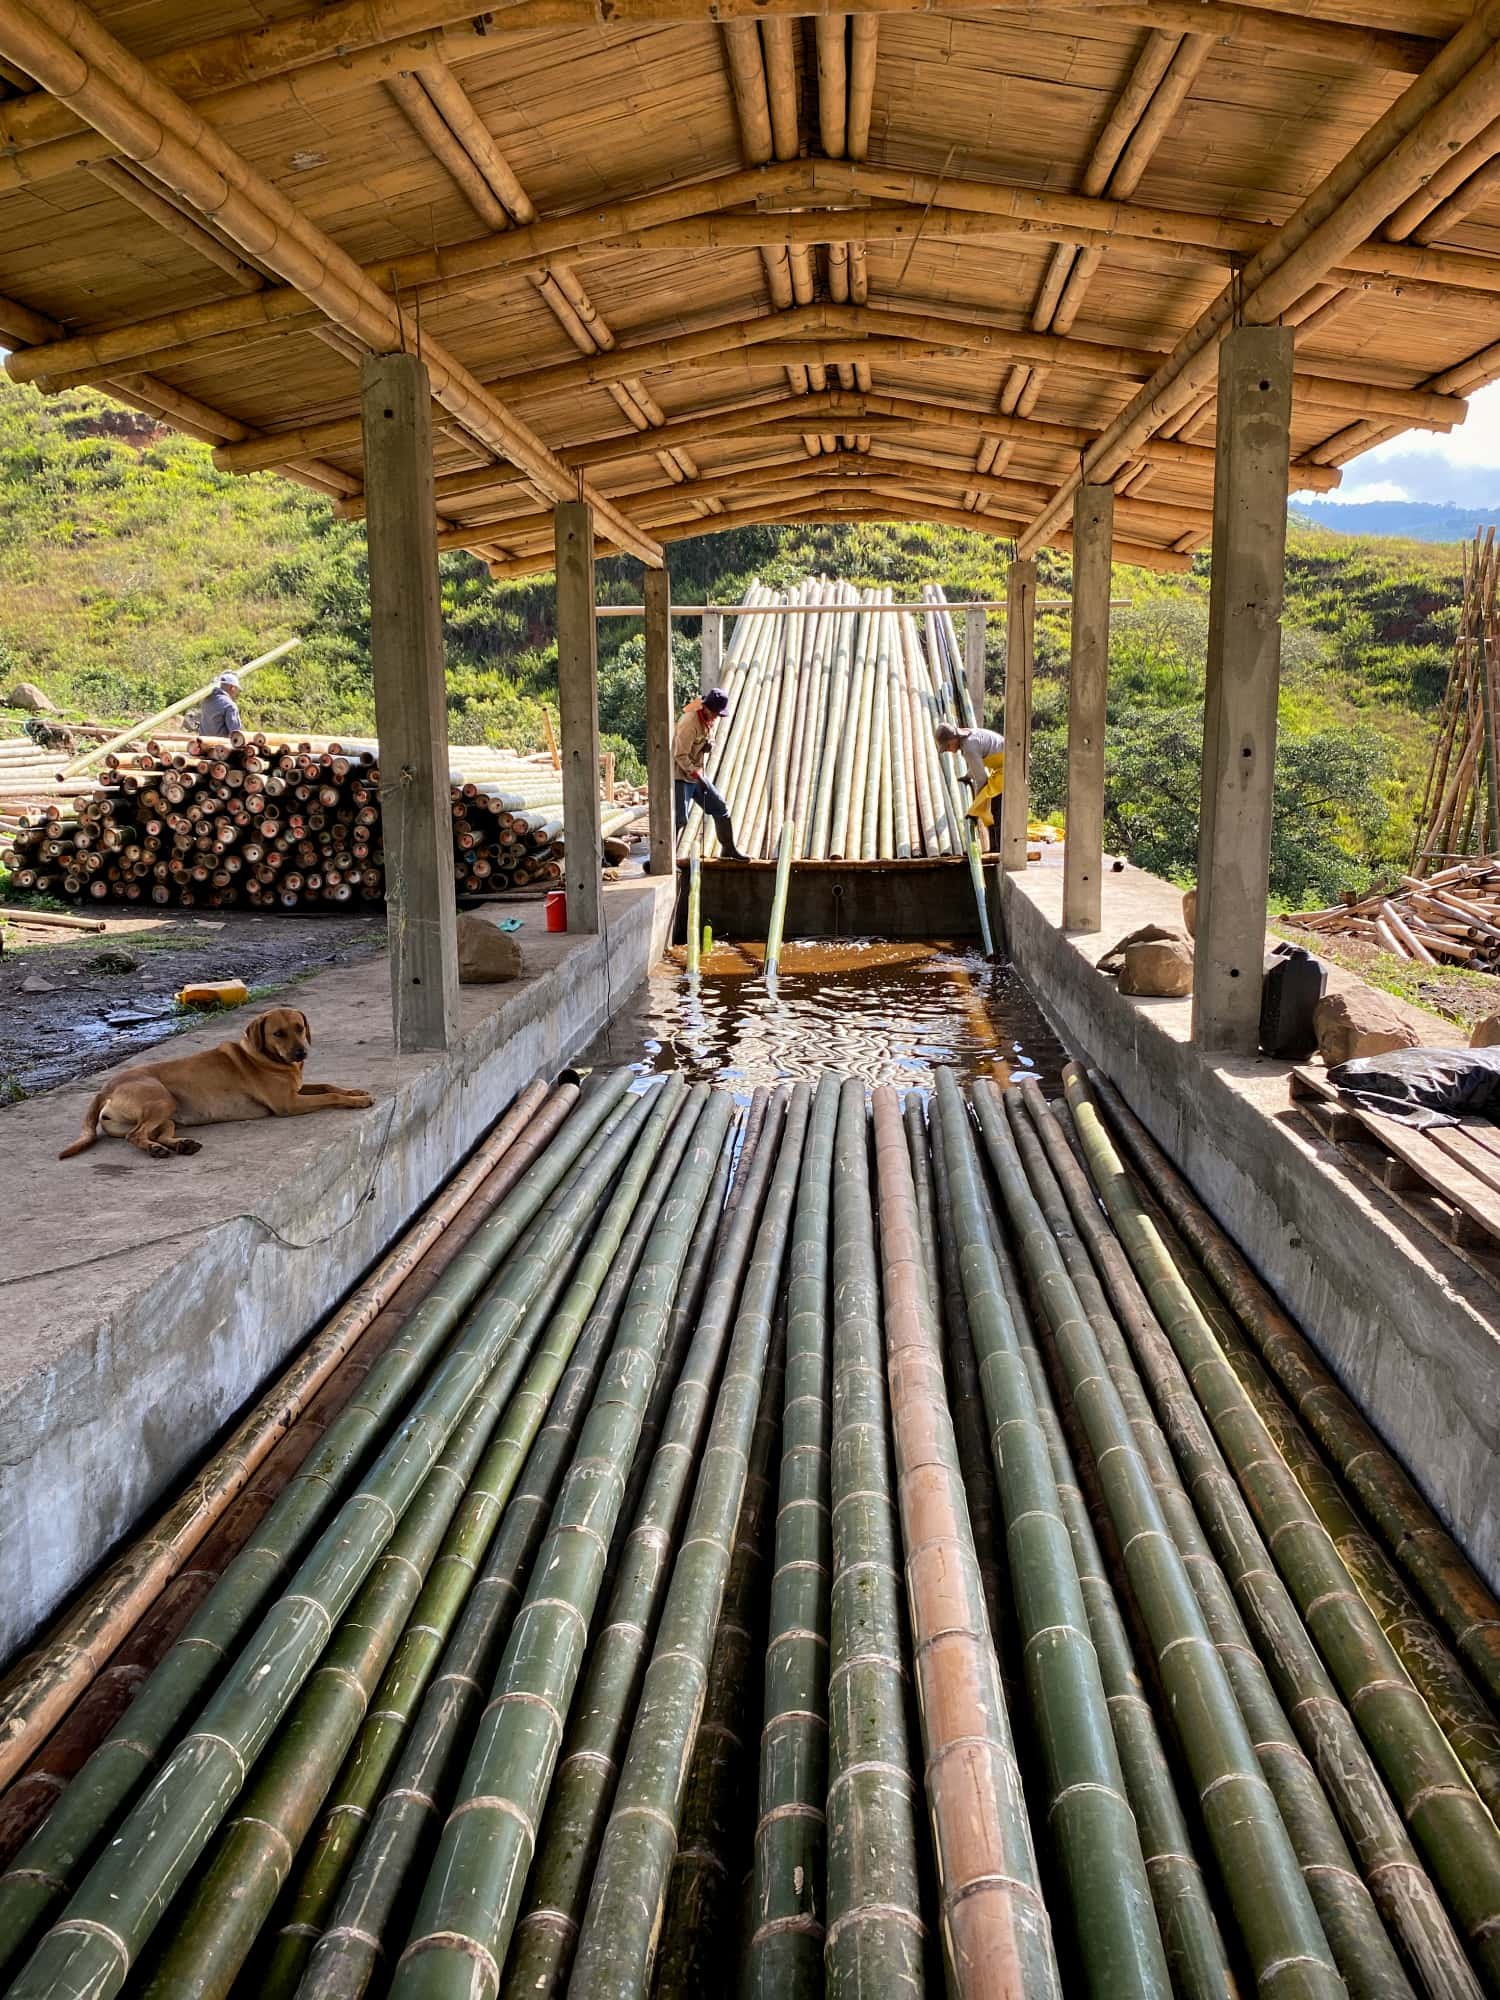 Bamboo Poles from Colombia - The Best Construction Bamboo